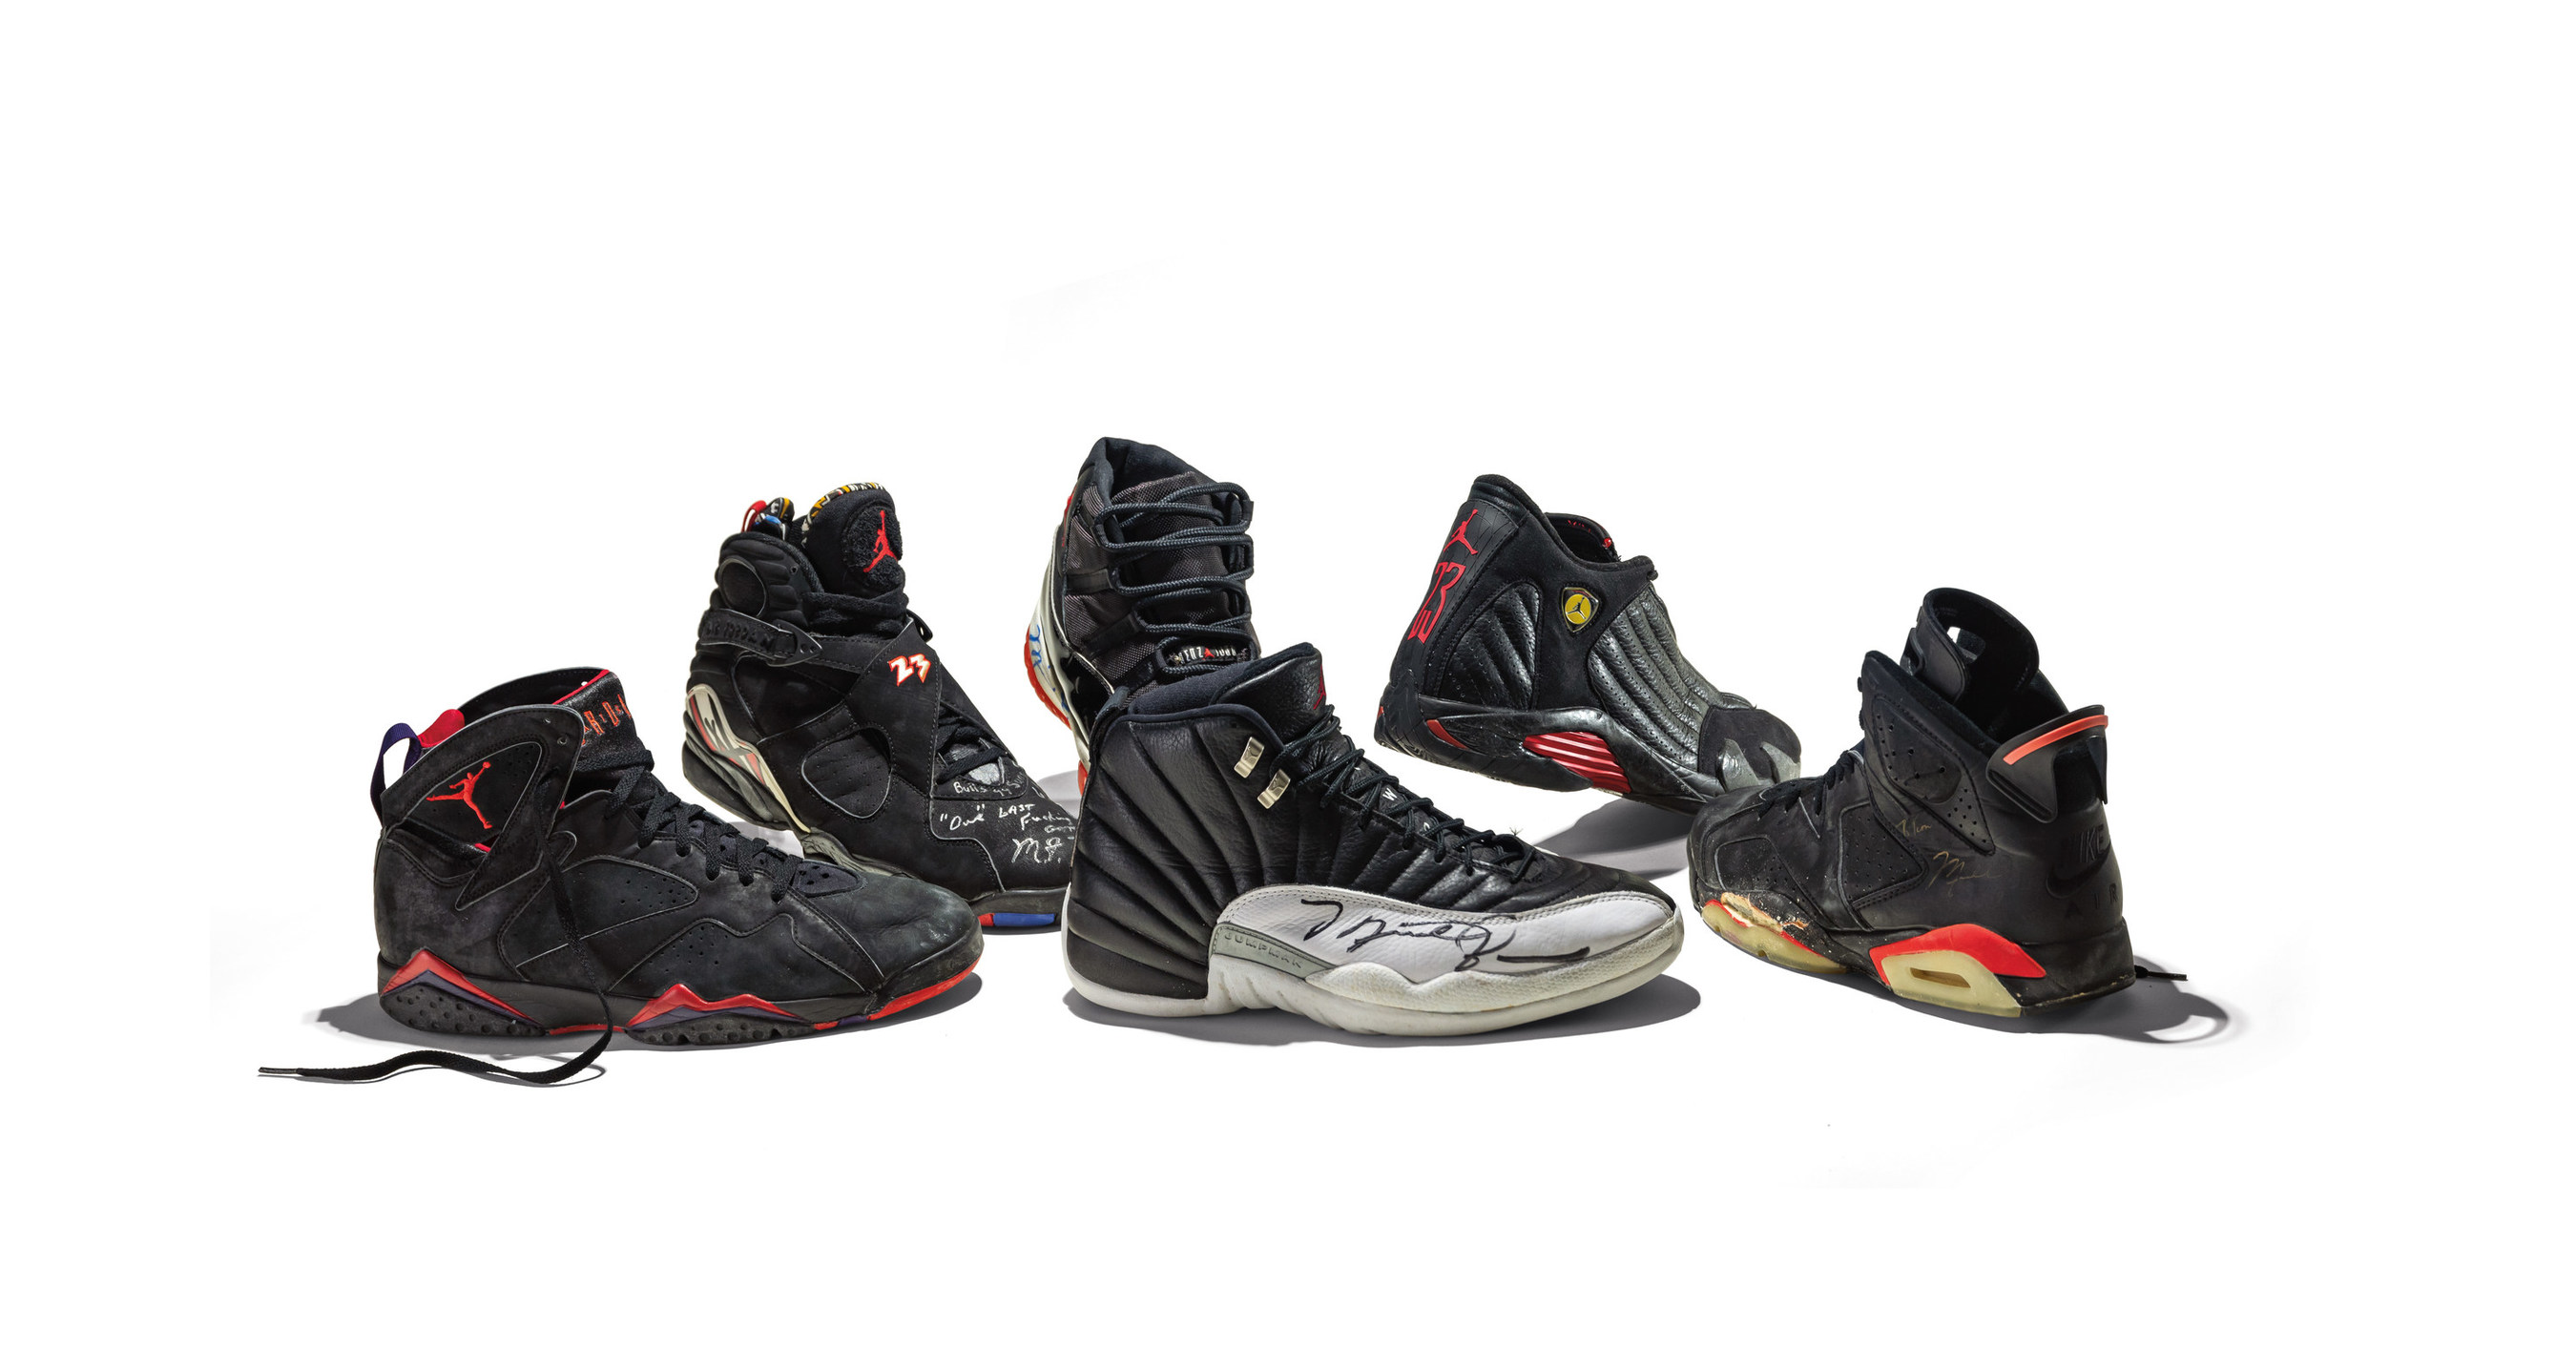 MJmondays: Classic Number 6 – Sneaker History - Podcasts, Footwear News &  Sneaker Culture